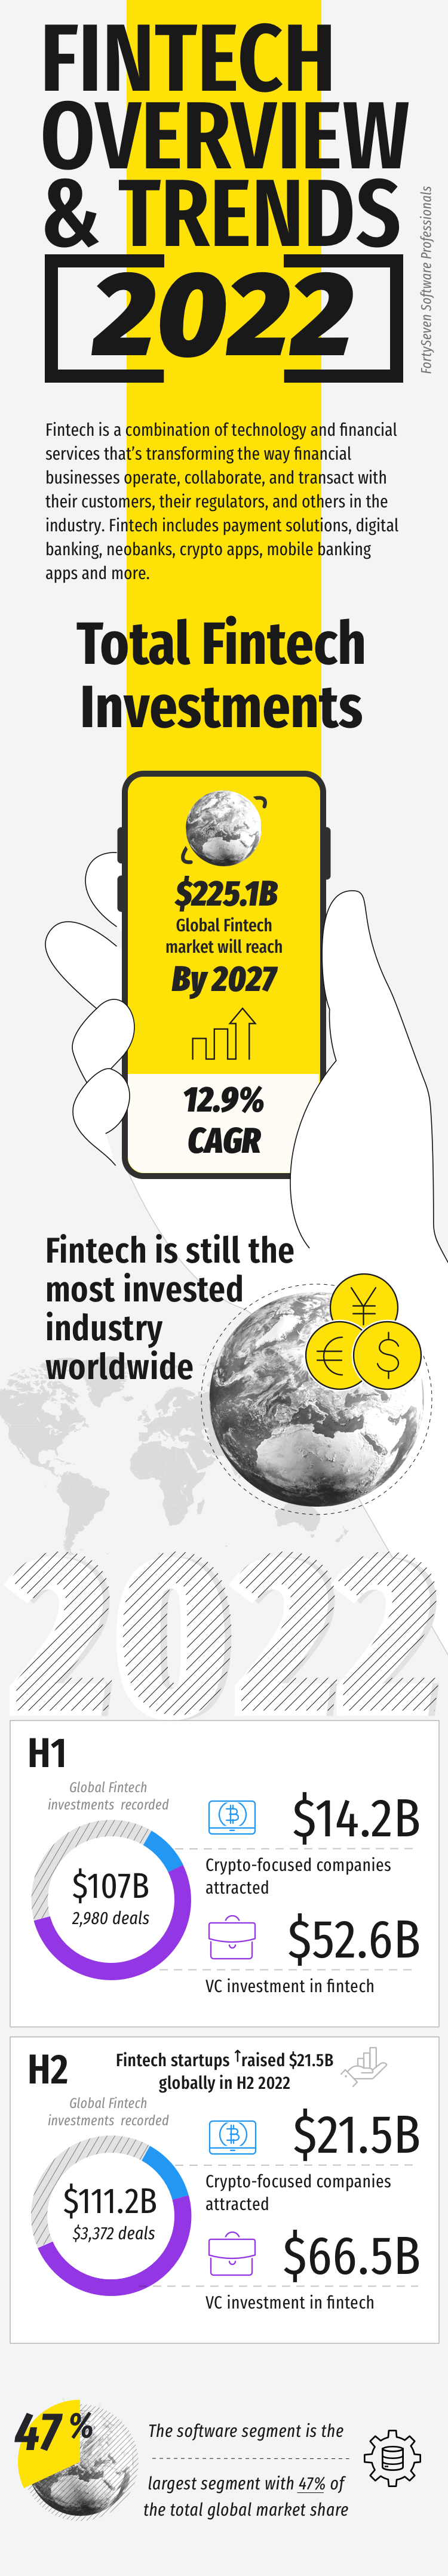 Infographic: Fintech Overview & Trends 2022 - 2024 - 17